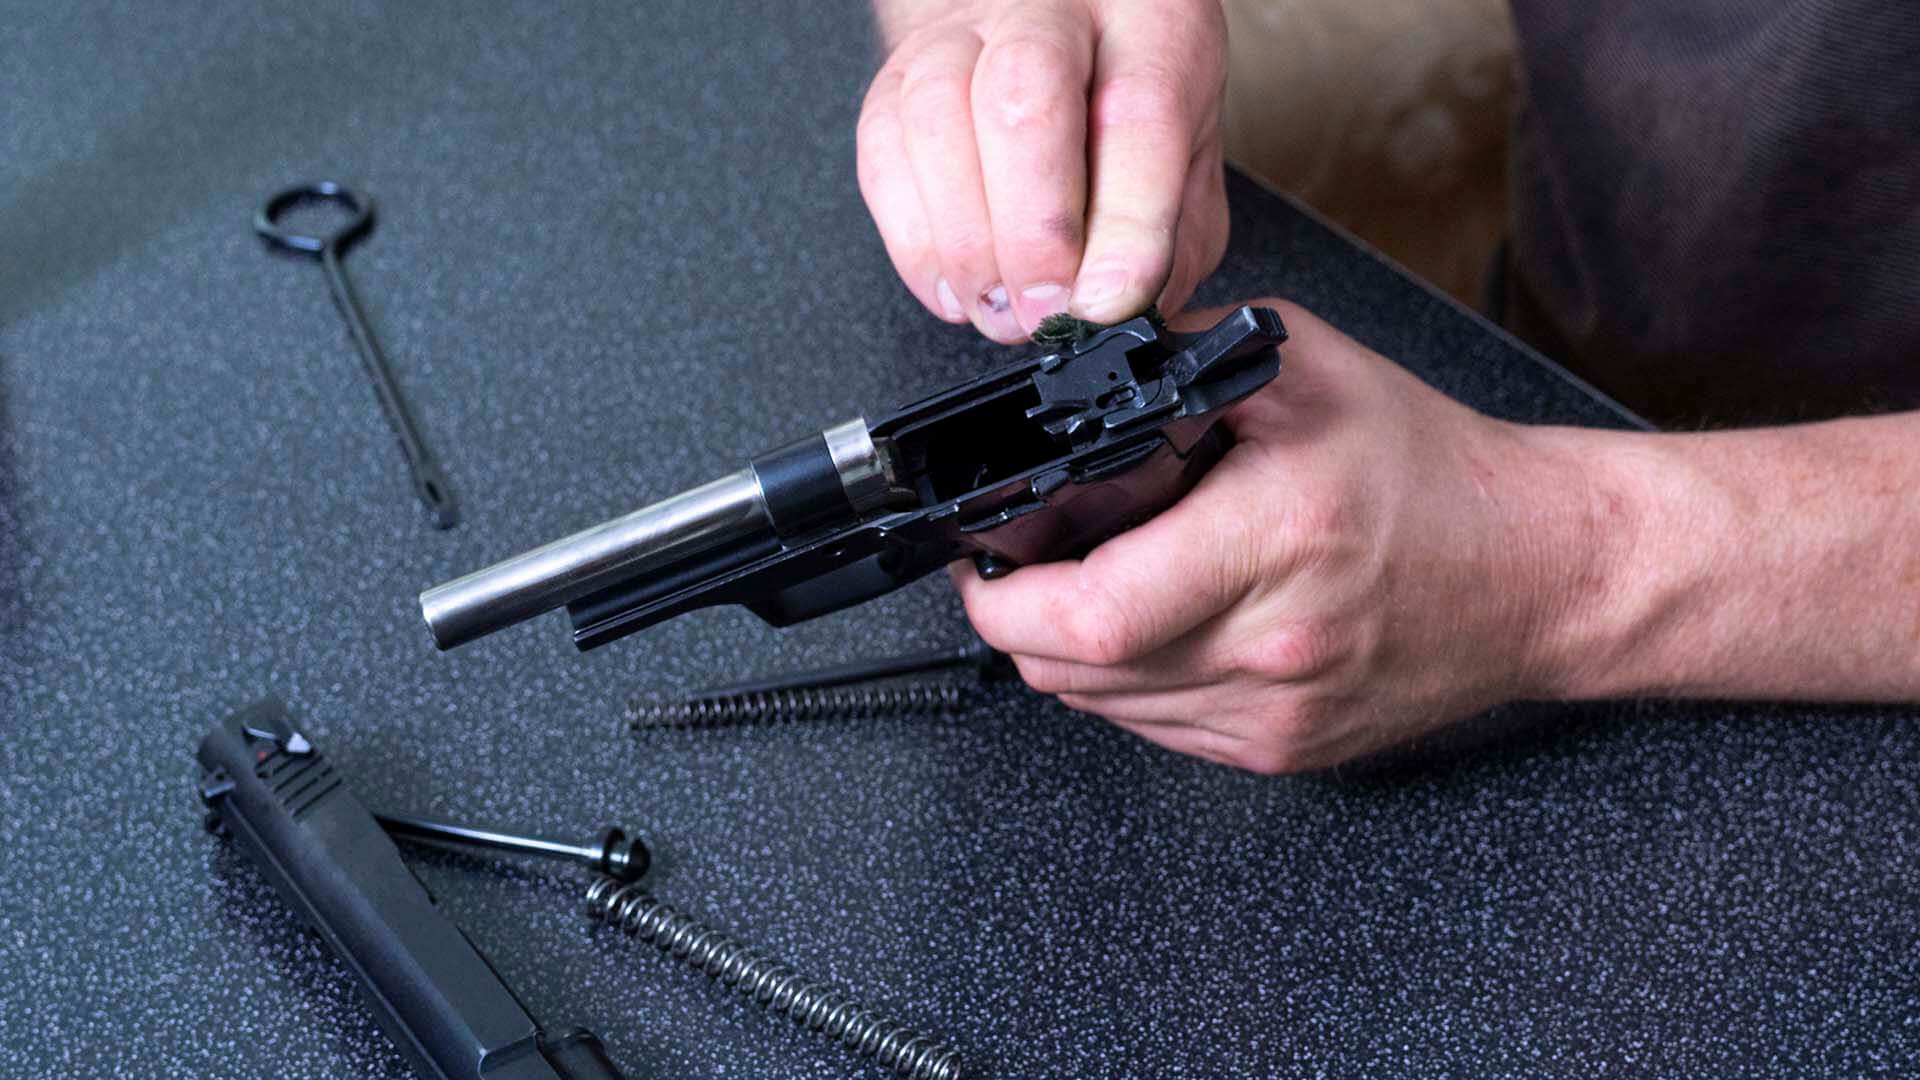 Product liability attorney inspecting a defective gun